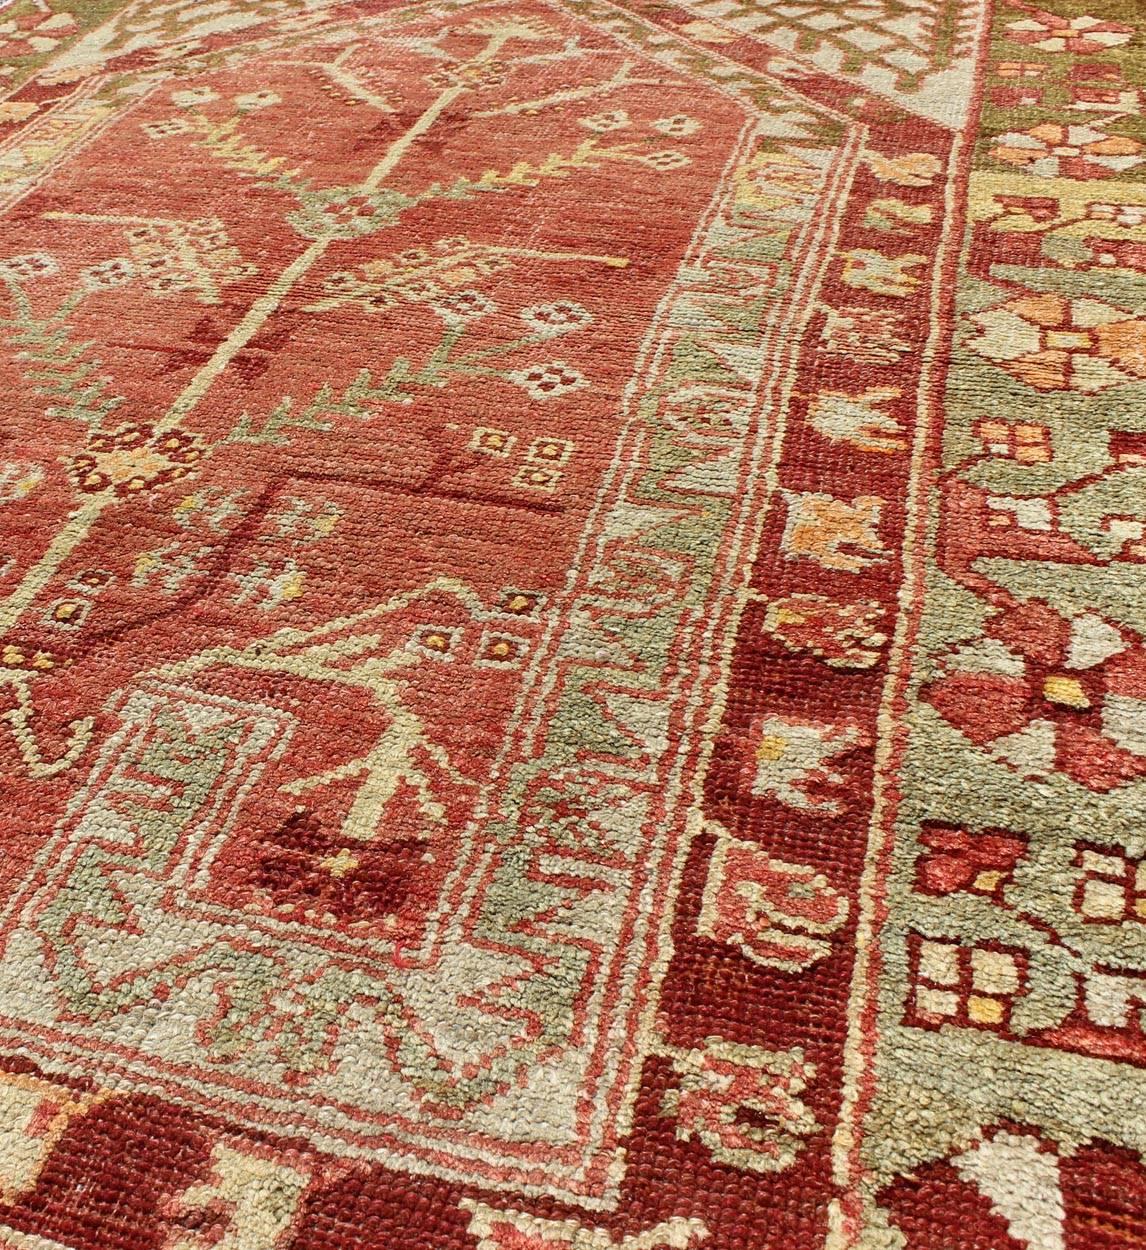 Antique Oushak Rug with Directional Tribal Motifs in Soft Pink Red & Green In Excellent Condition For Sale In Atlanta, GA